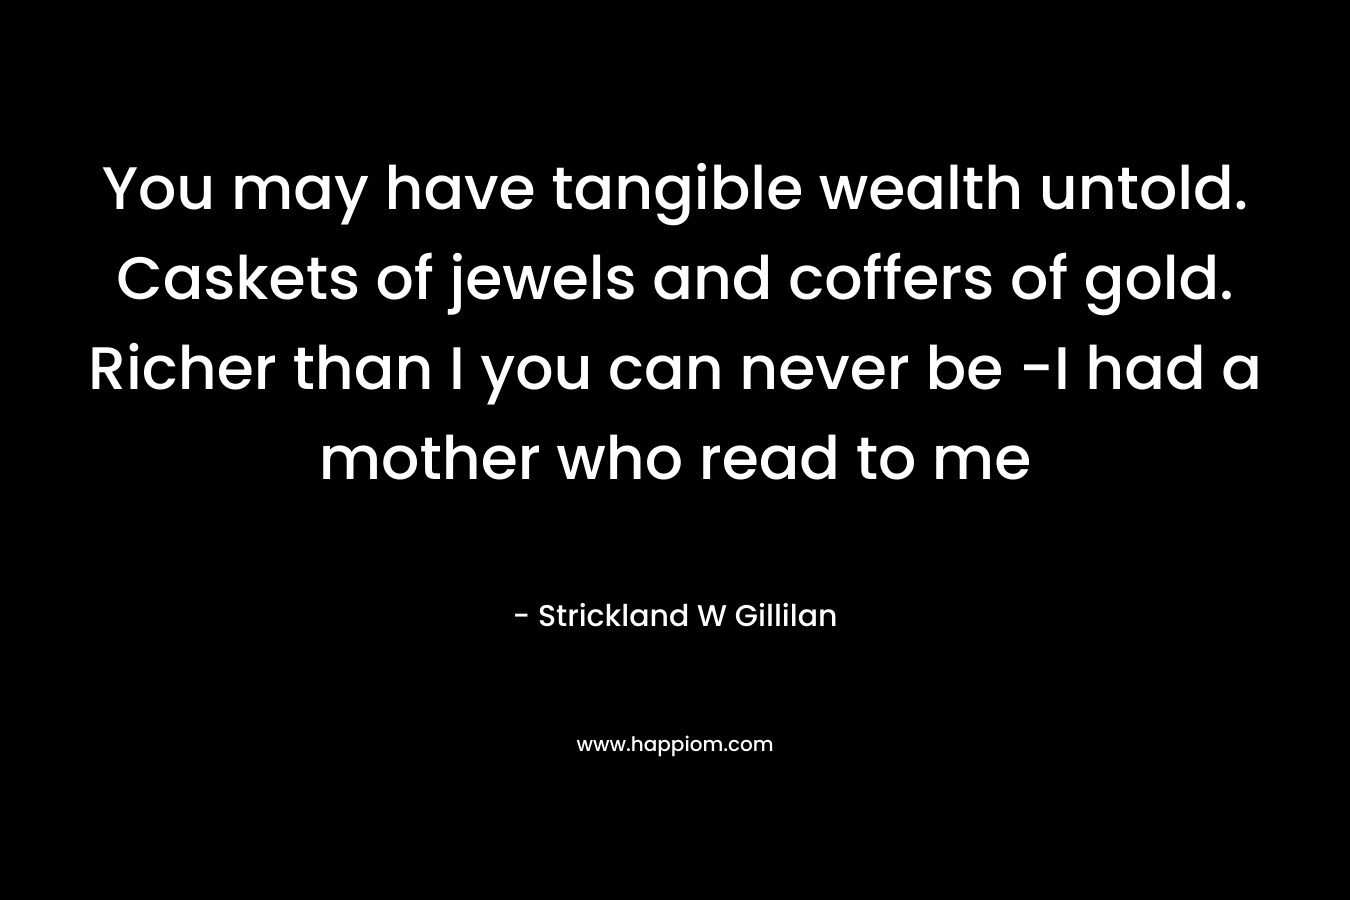 You may have tangible wealth untold. Caskets of jewels and coffers of gold. Richer than I you can never be -I had a mother who read to me – Strickland W Gillilan